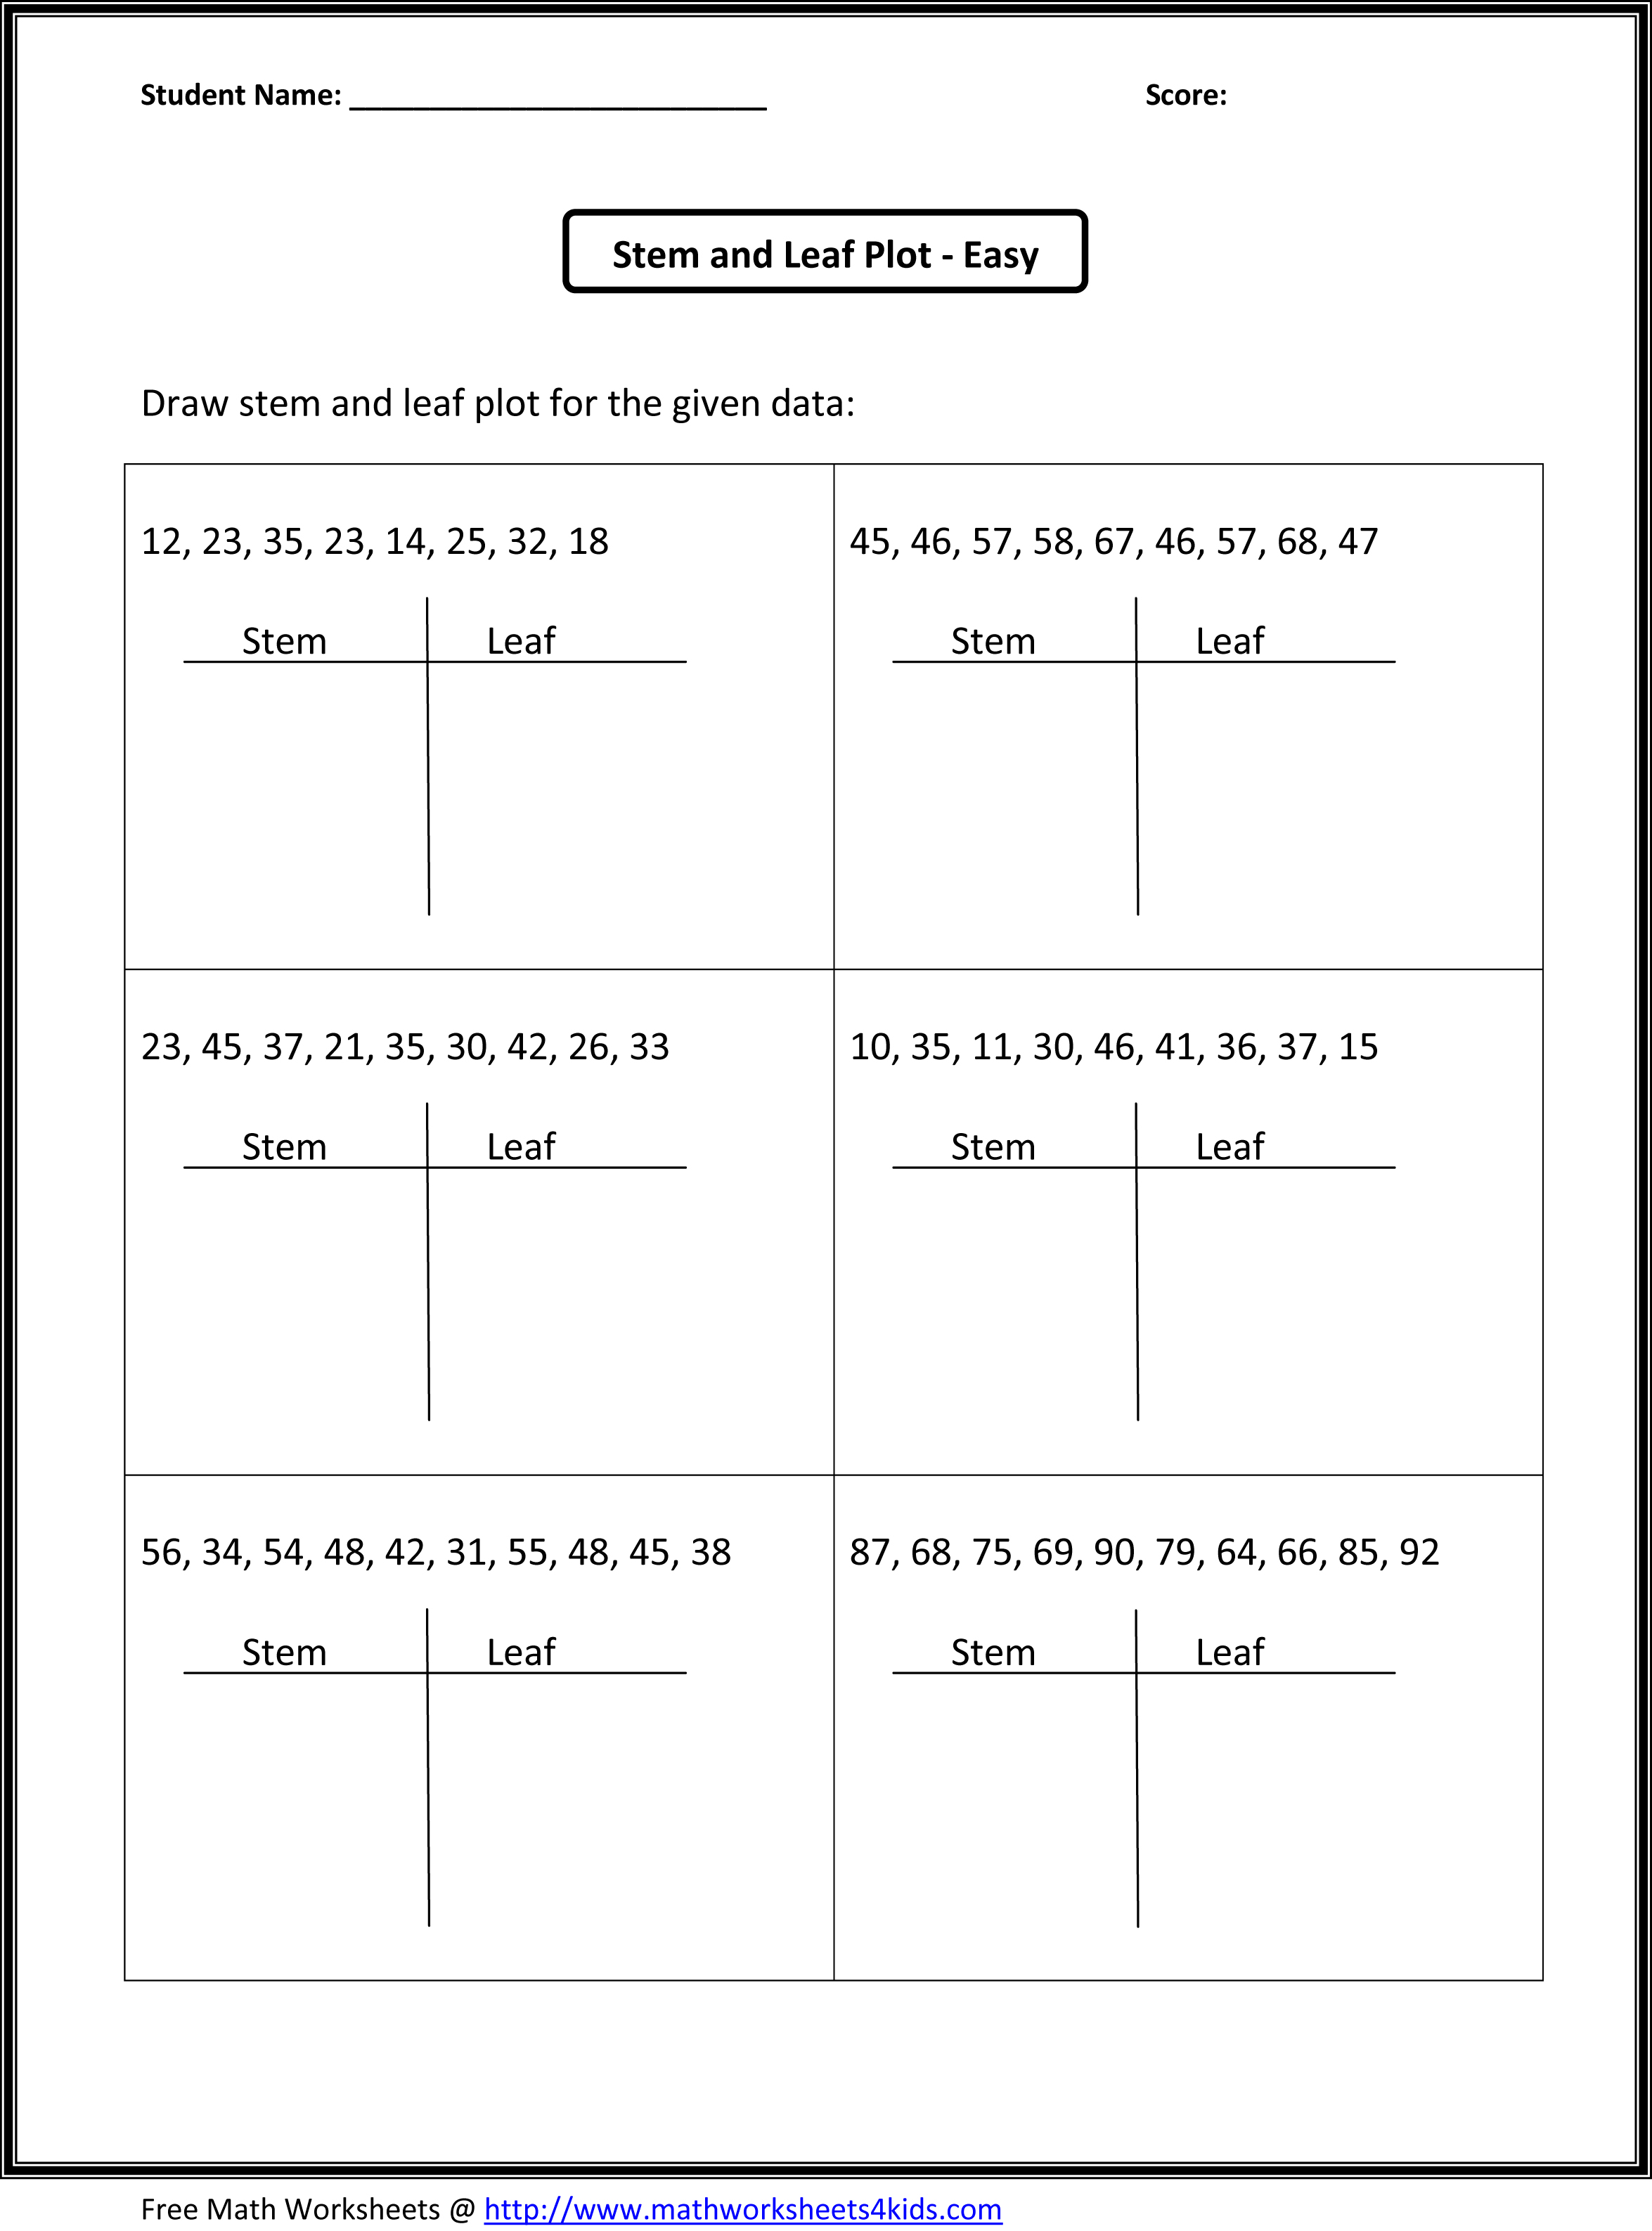 14 Best Images of 7th Grade Writing Worksheets 7th Grade